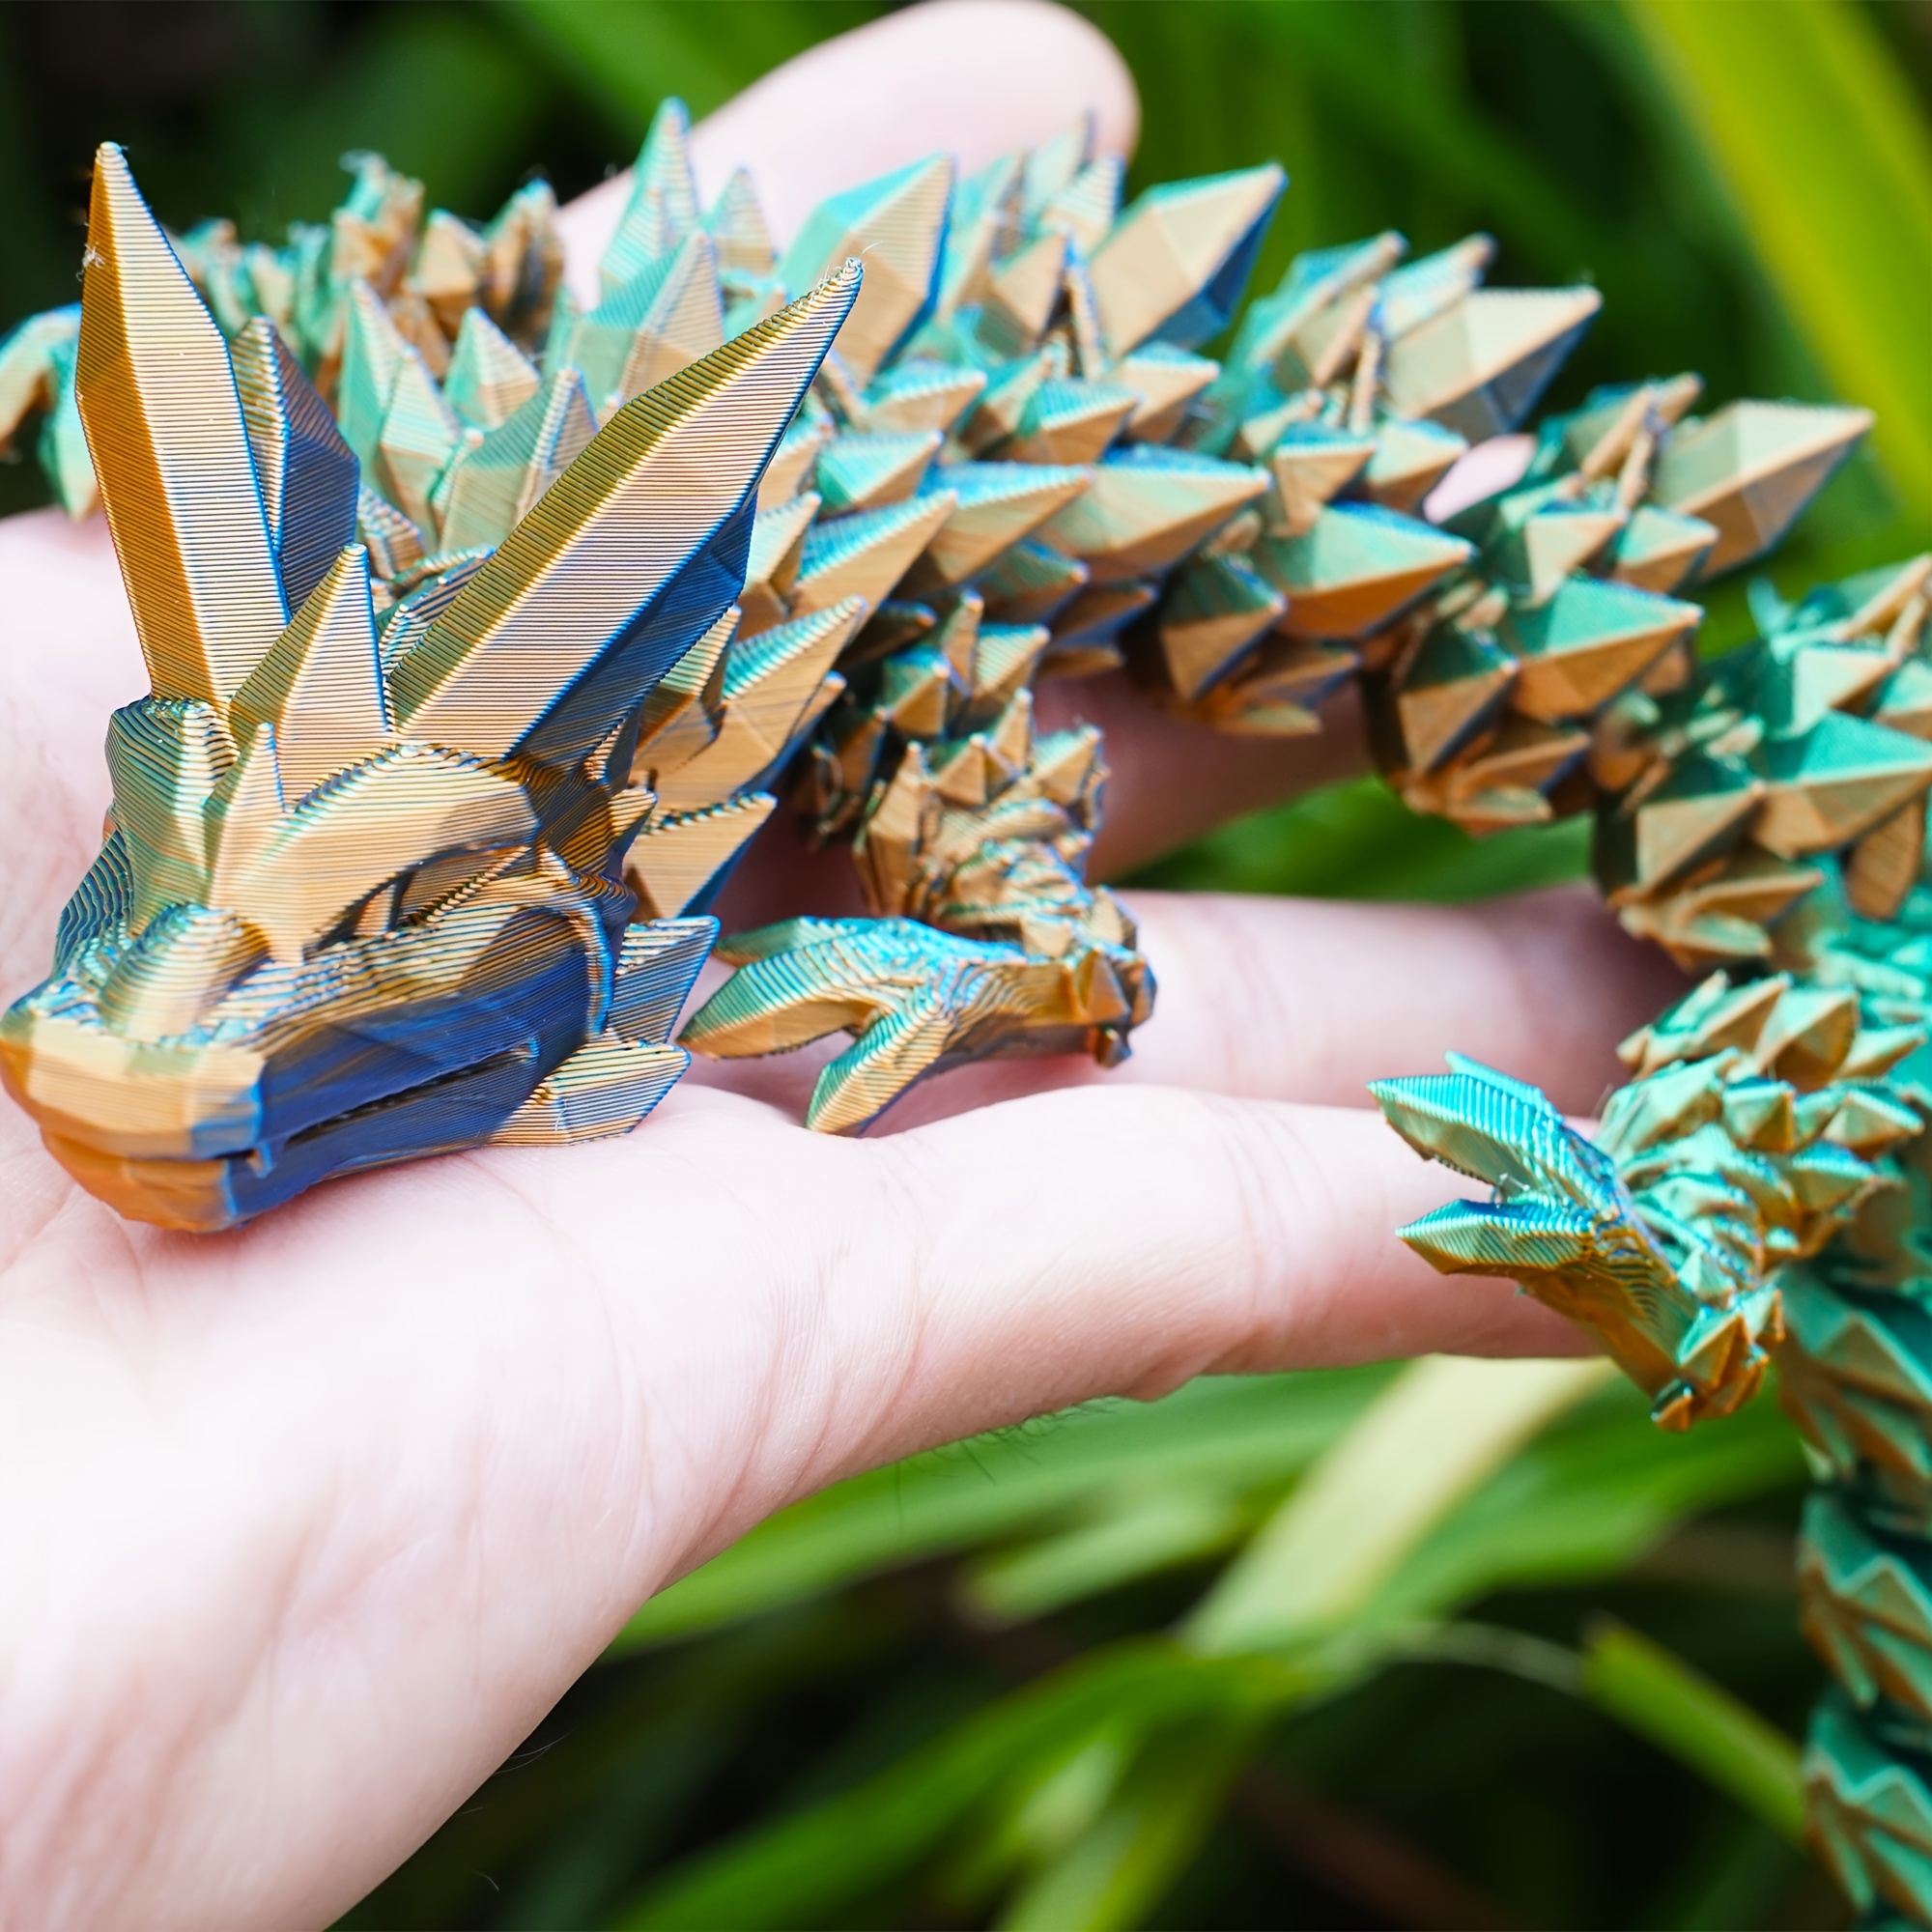 3D Printed Dragon, Articulated Dragon Fidget Toy Posable Flexible Dragon  Toys for Car Decoration and Ornament Figures 